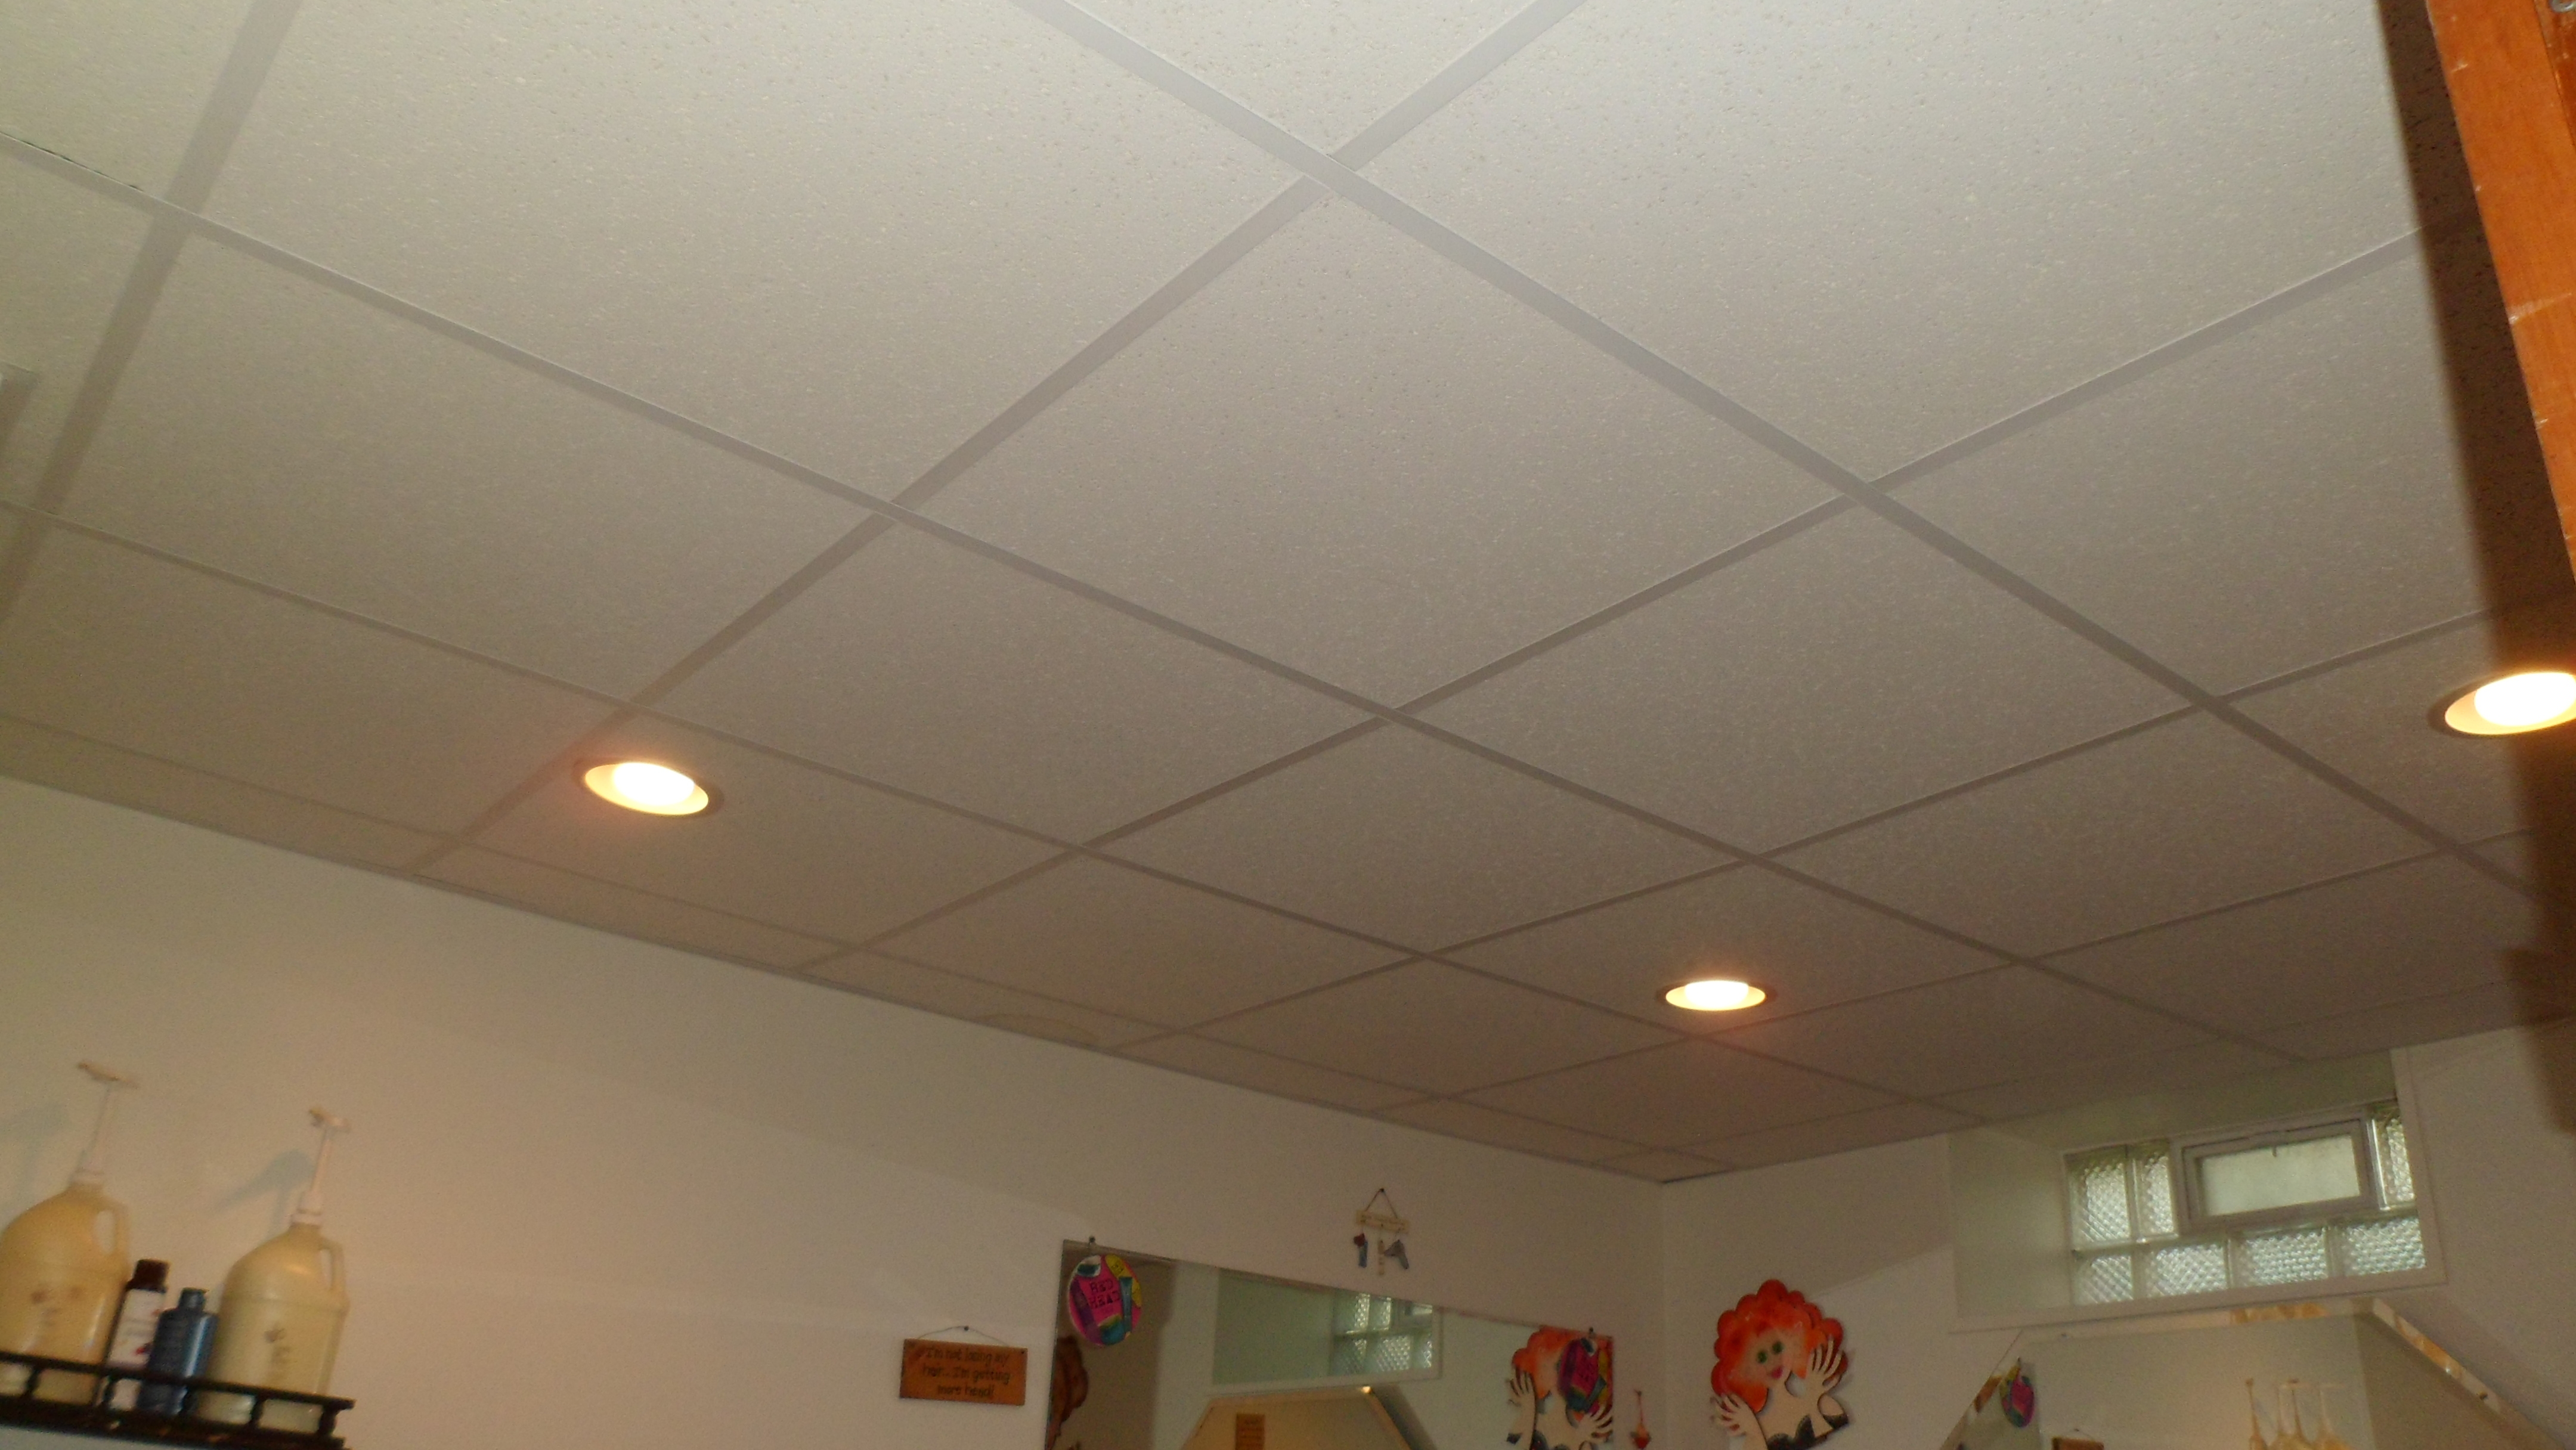 Can Lights For Drop Ceilings10 reasons to install drop ceiling recessed lights warisan lighting